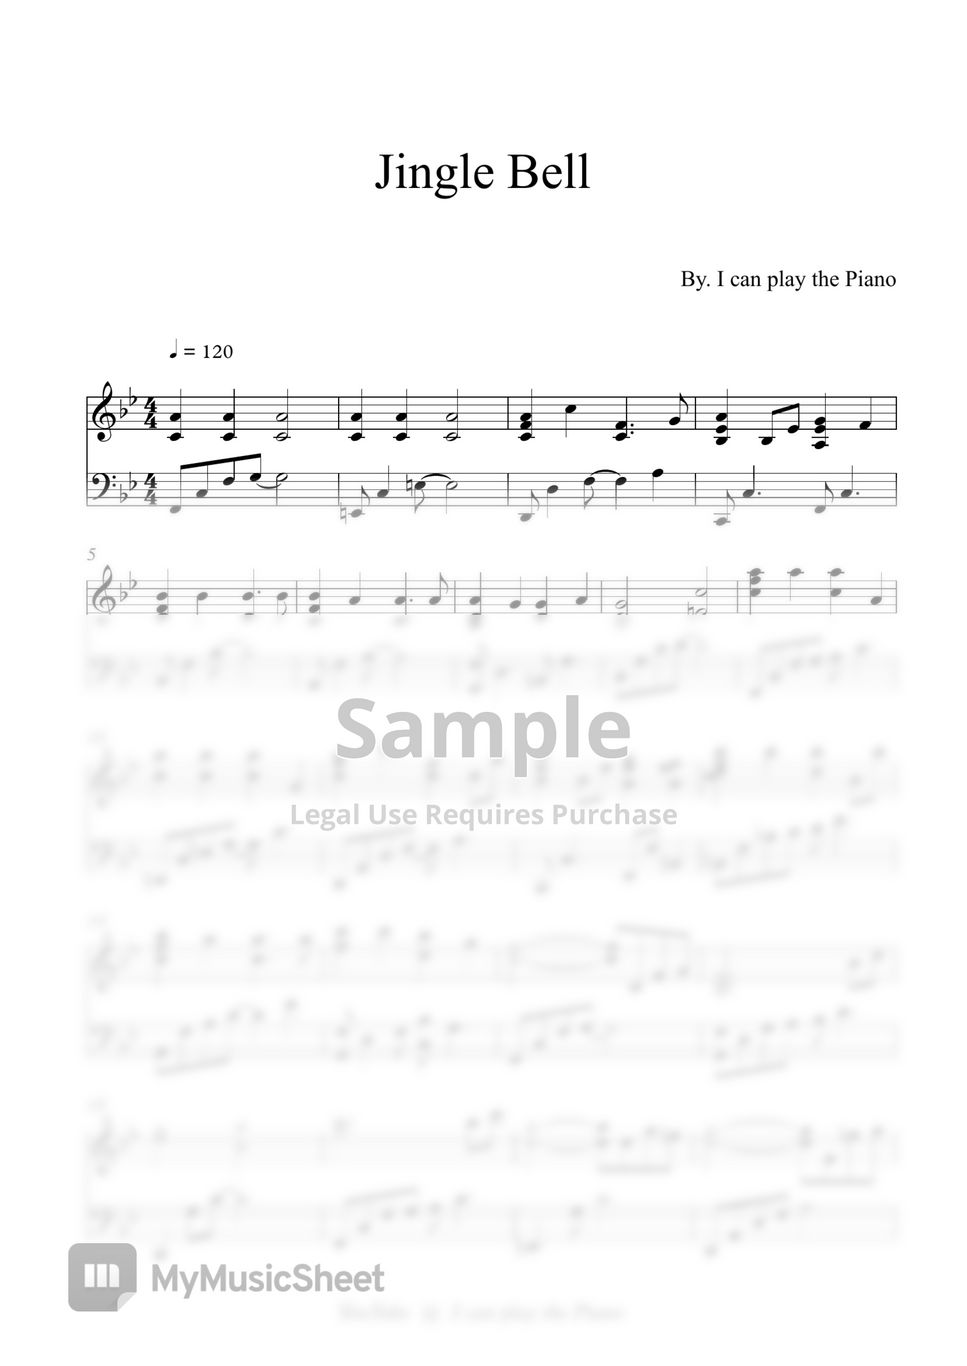 Christmas Carol - Jingle Bell by I can play the Piano